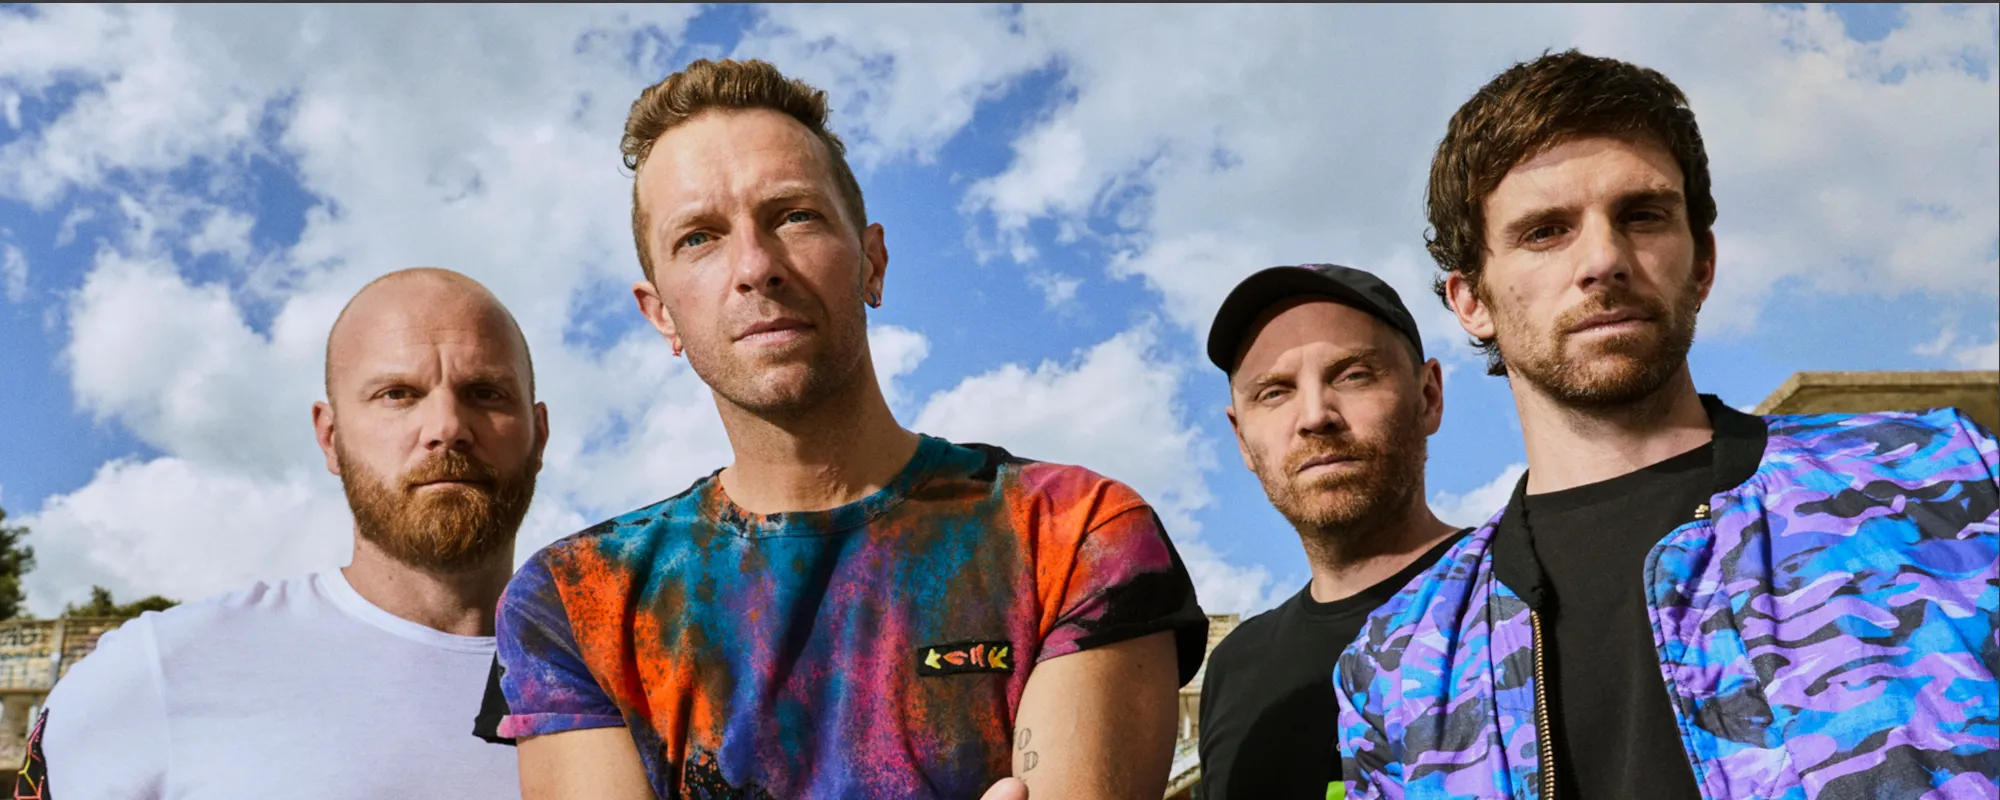 Coldplay Share Out of This World Video For “Biutyful,” Featuring Puppet Band The Wierdos